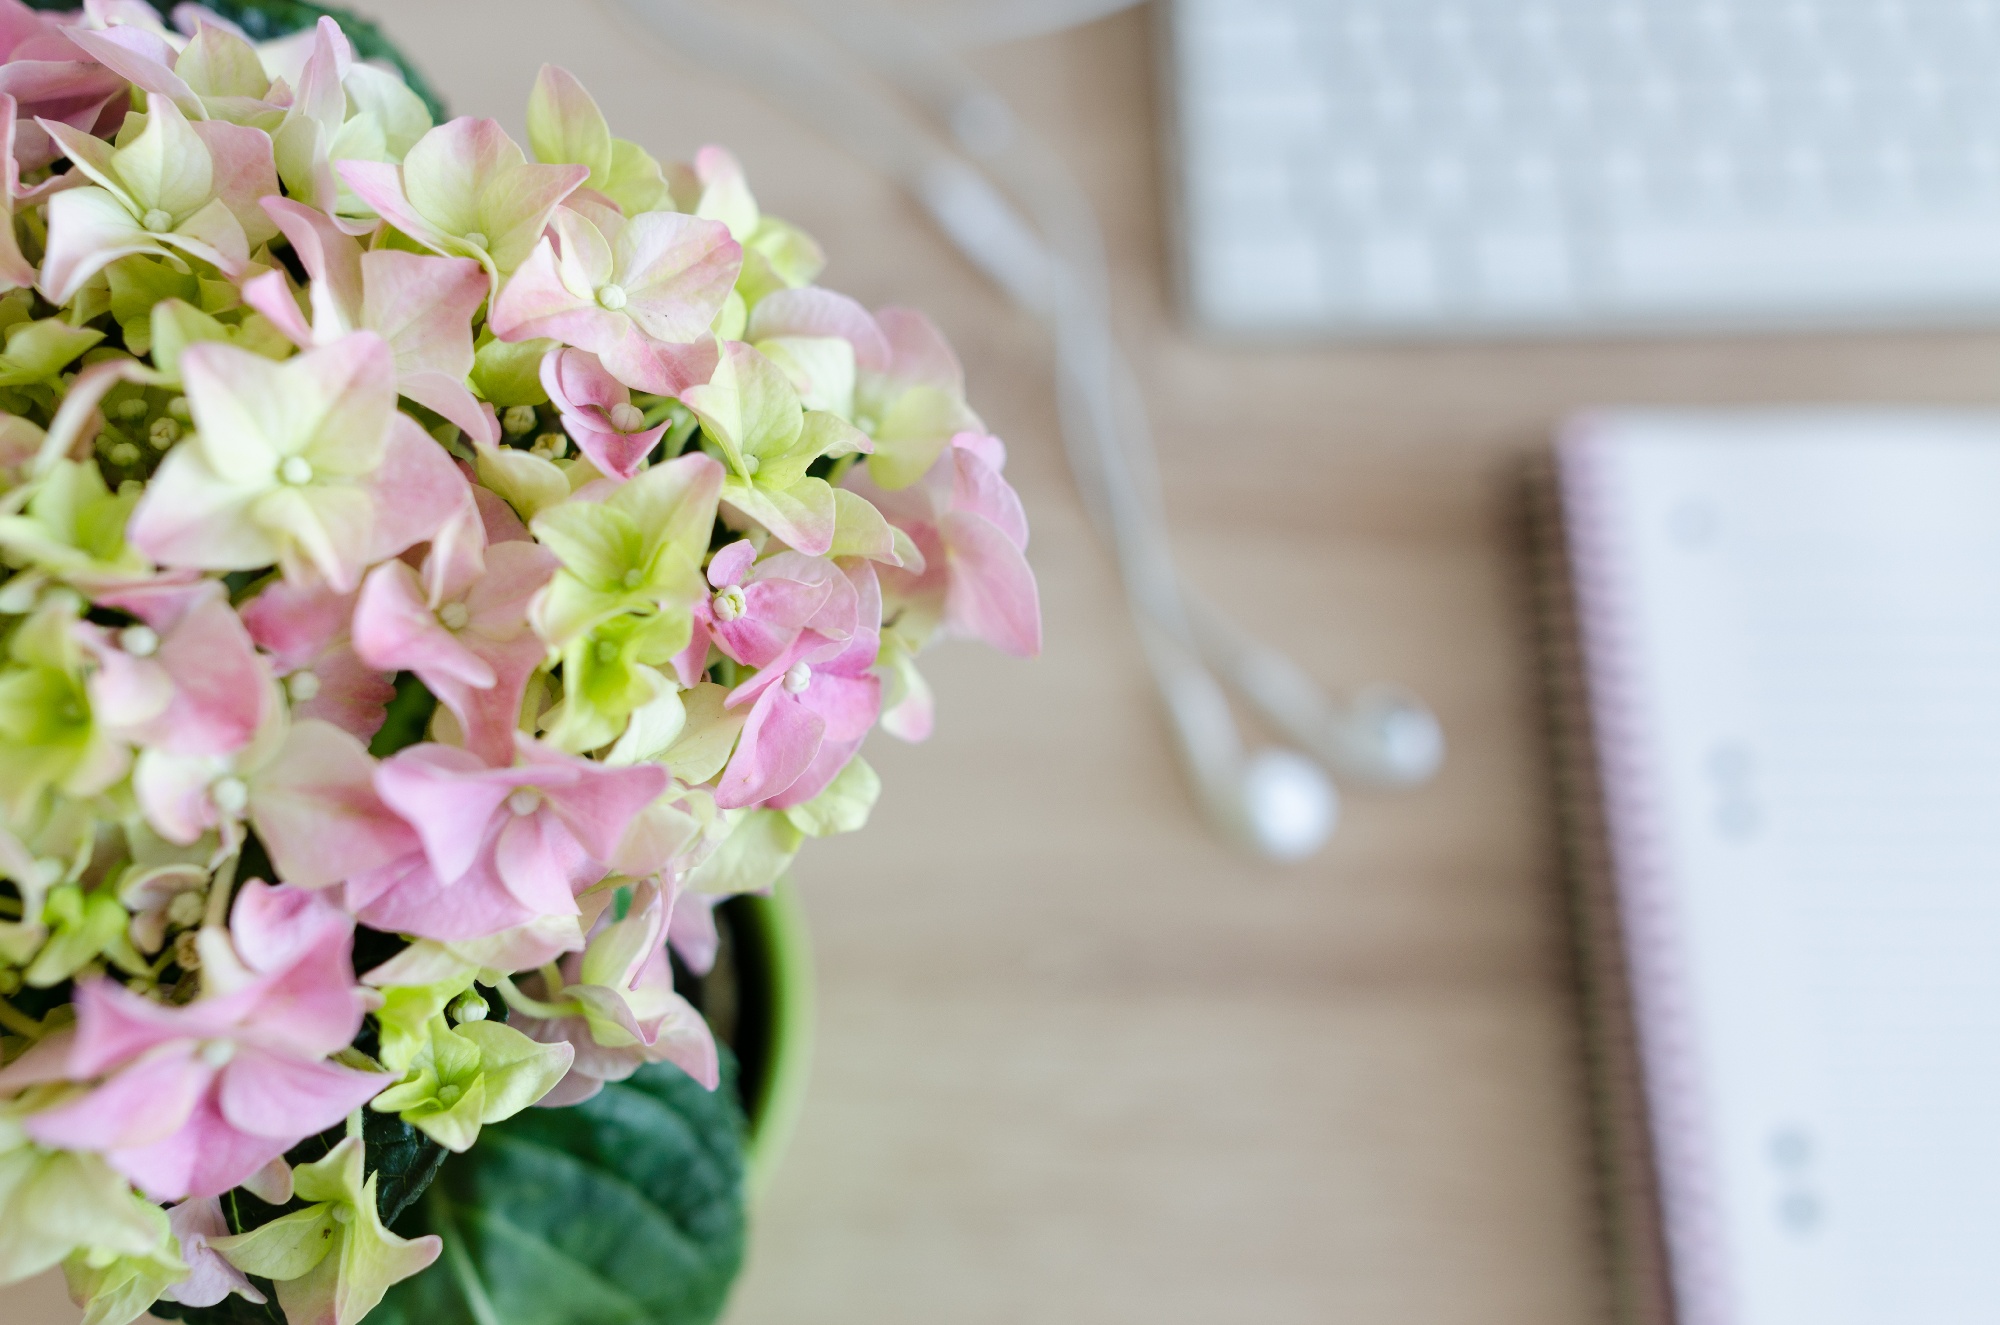 Canva - My Workplace with Fresh Flowers